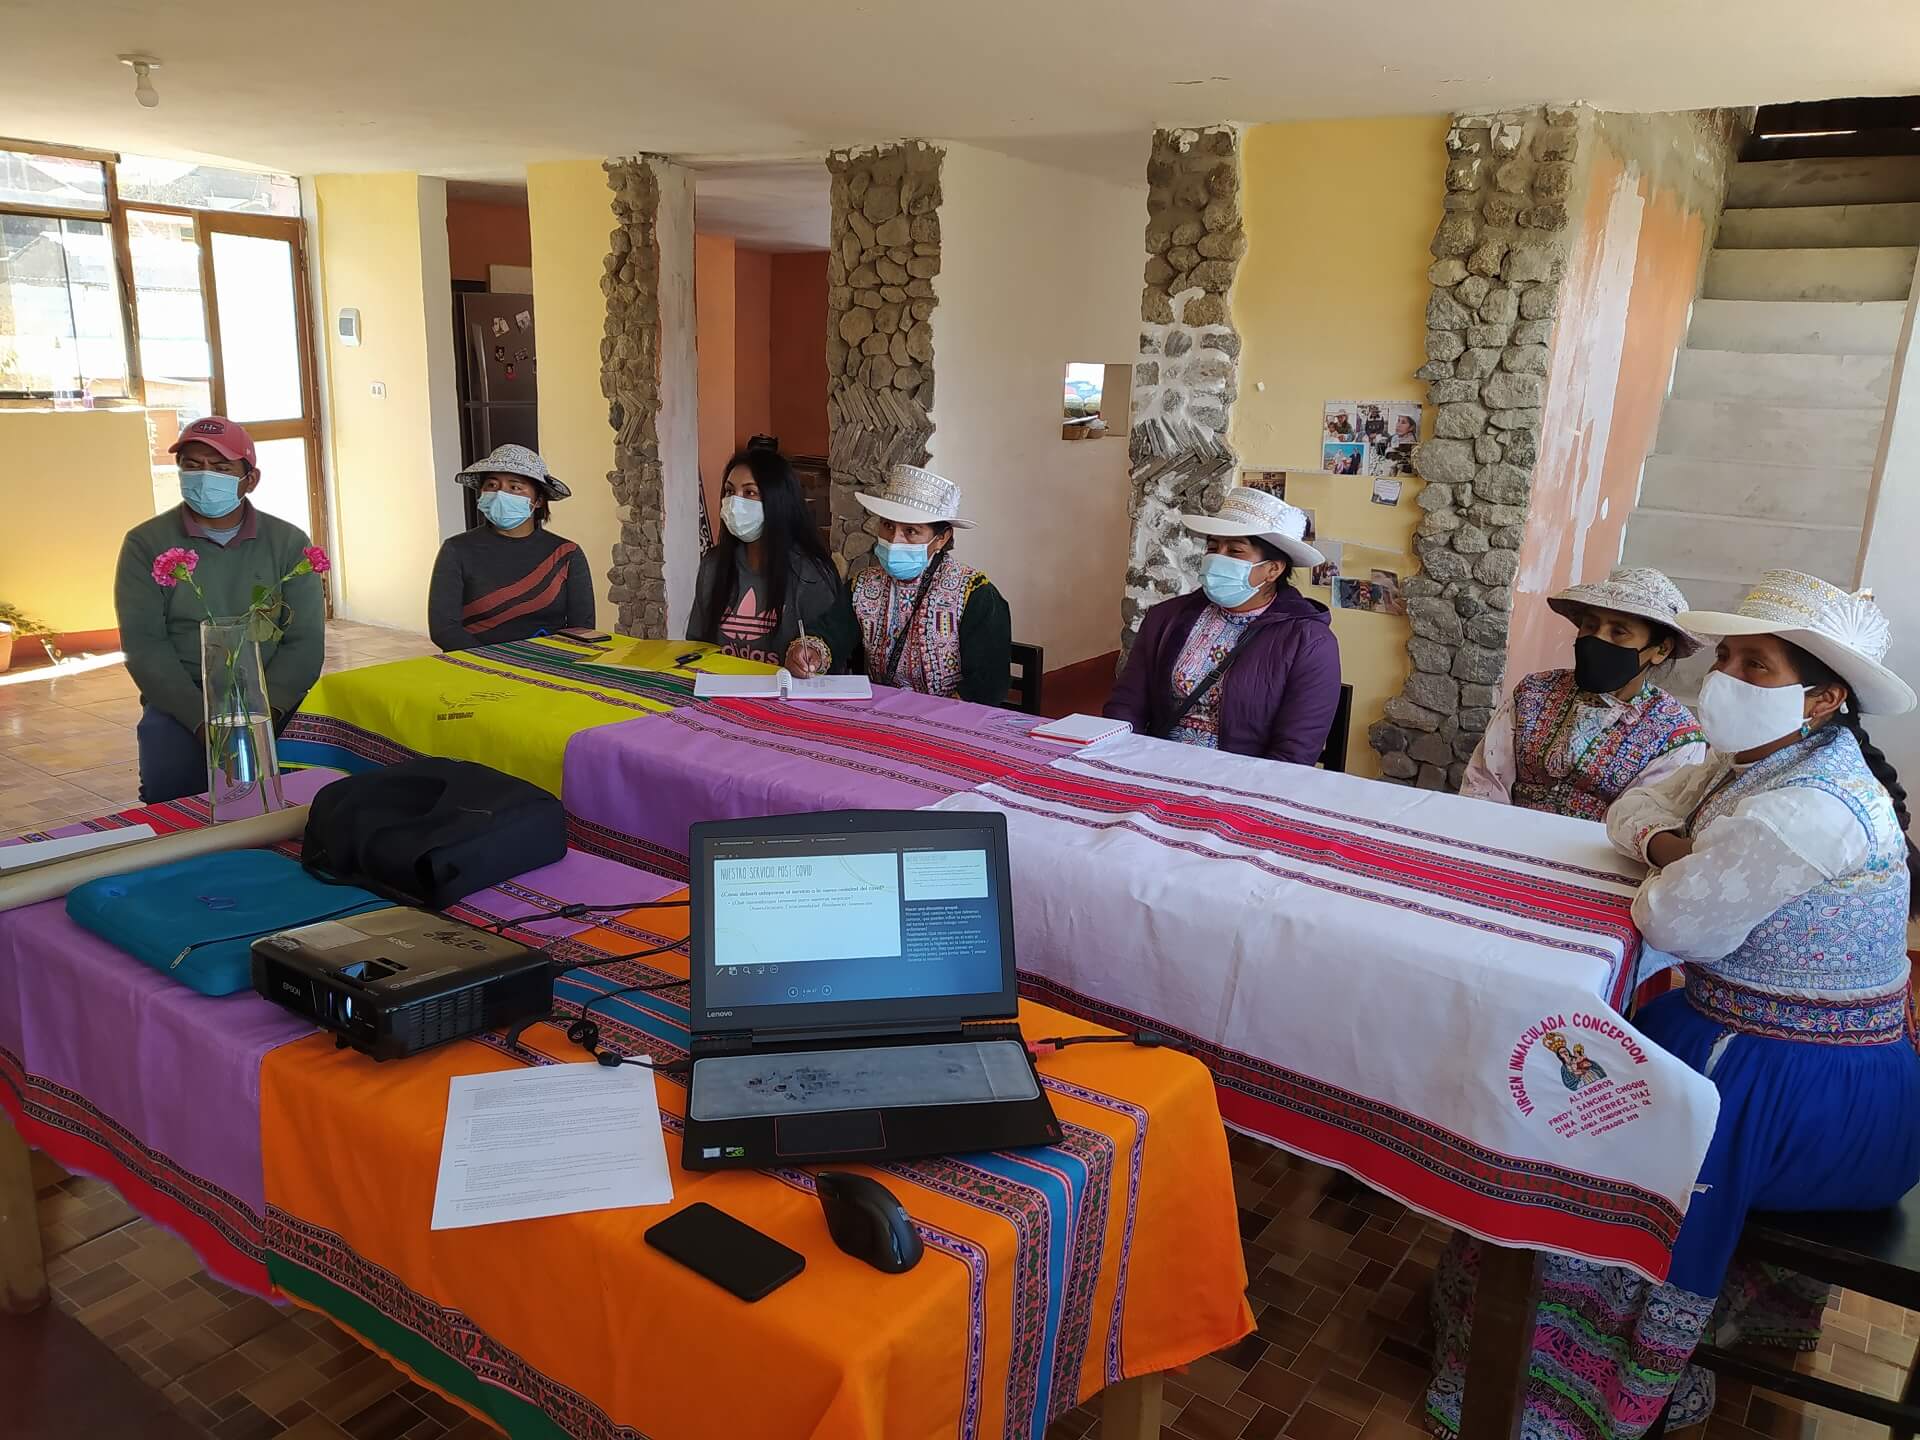 Local women participating in a workshop during Covid times, learning about sustainability, Covid measurements and other themes, organized by RESPONSible Travel Peru.